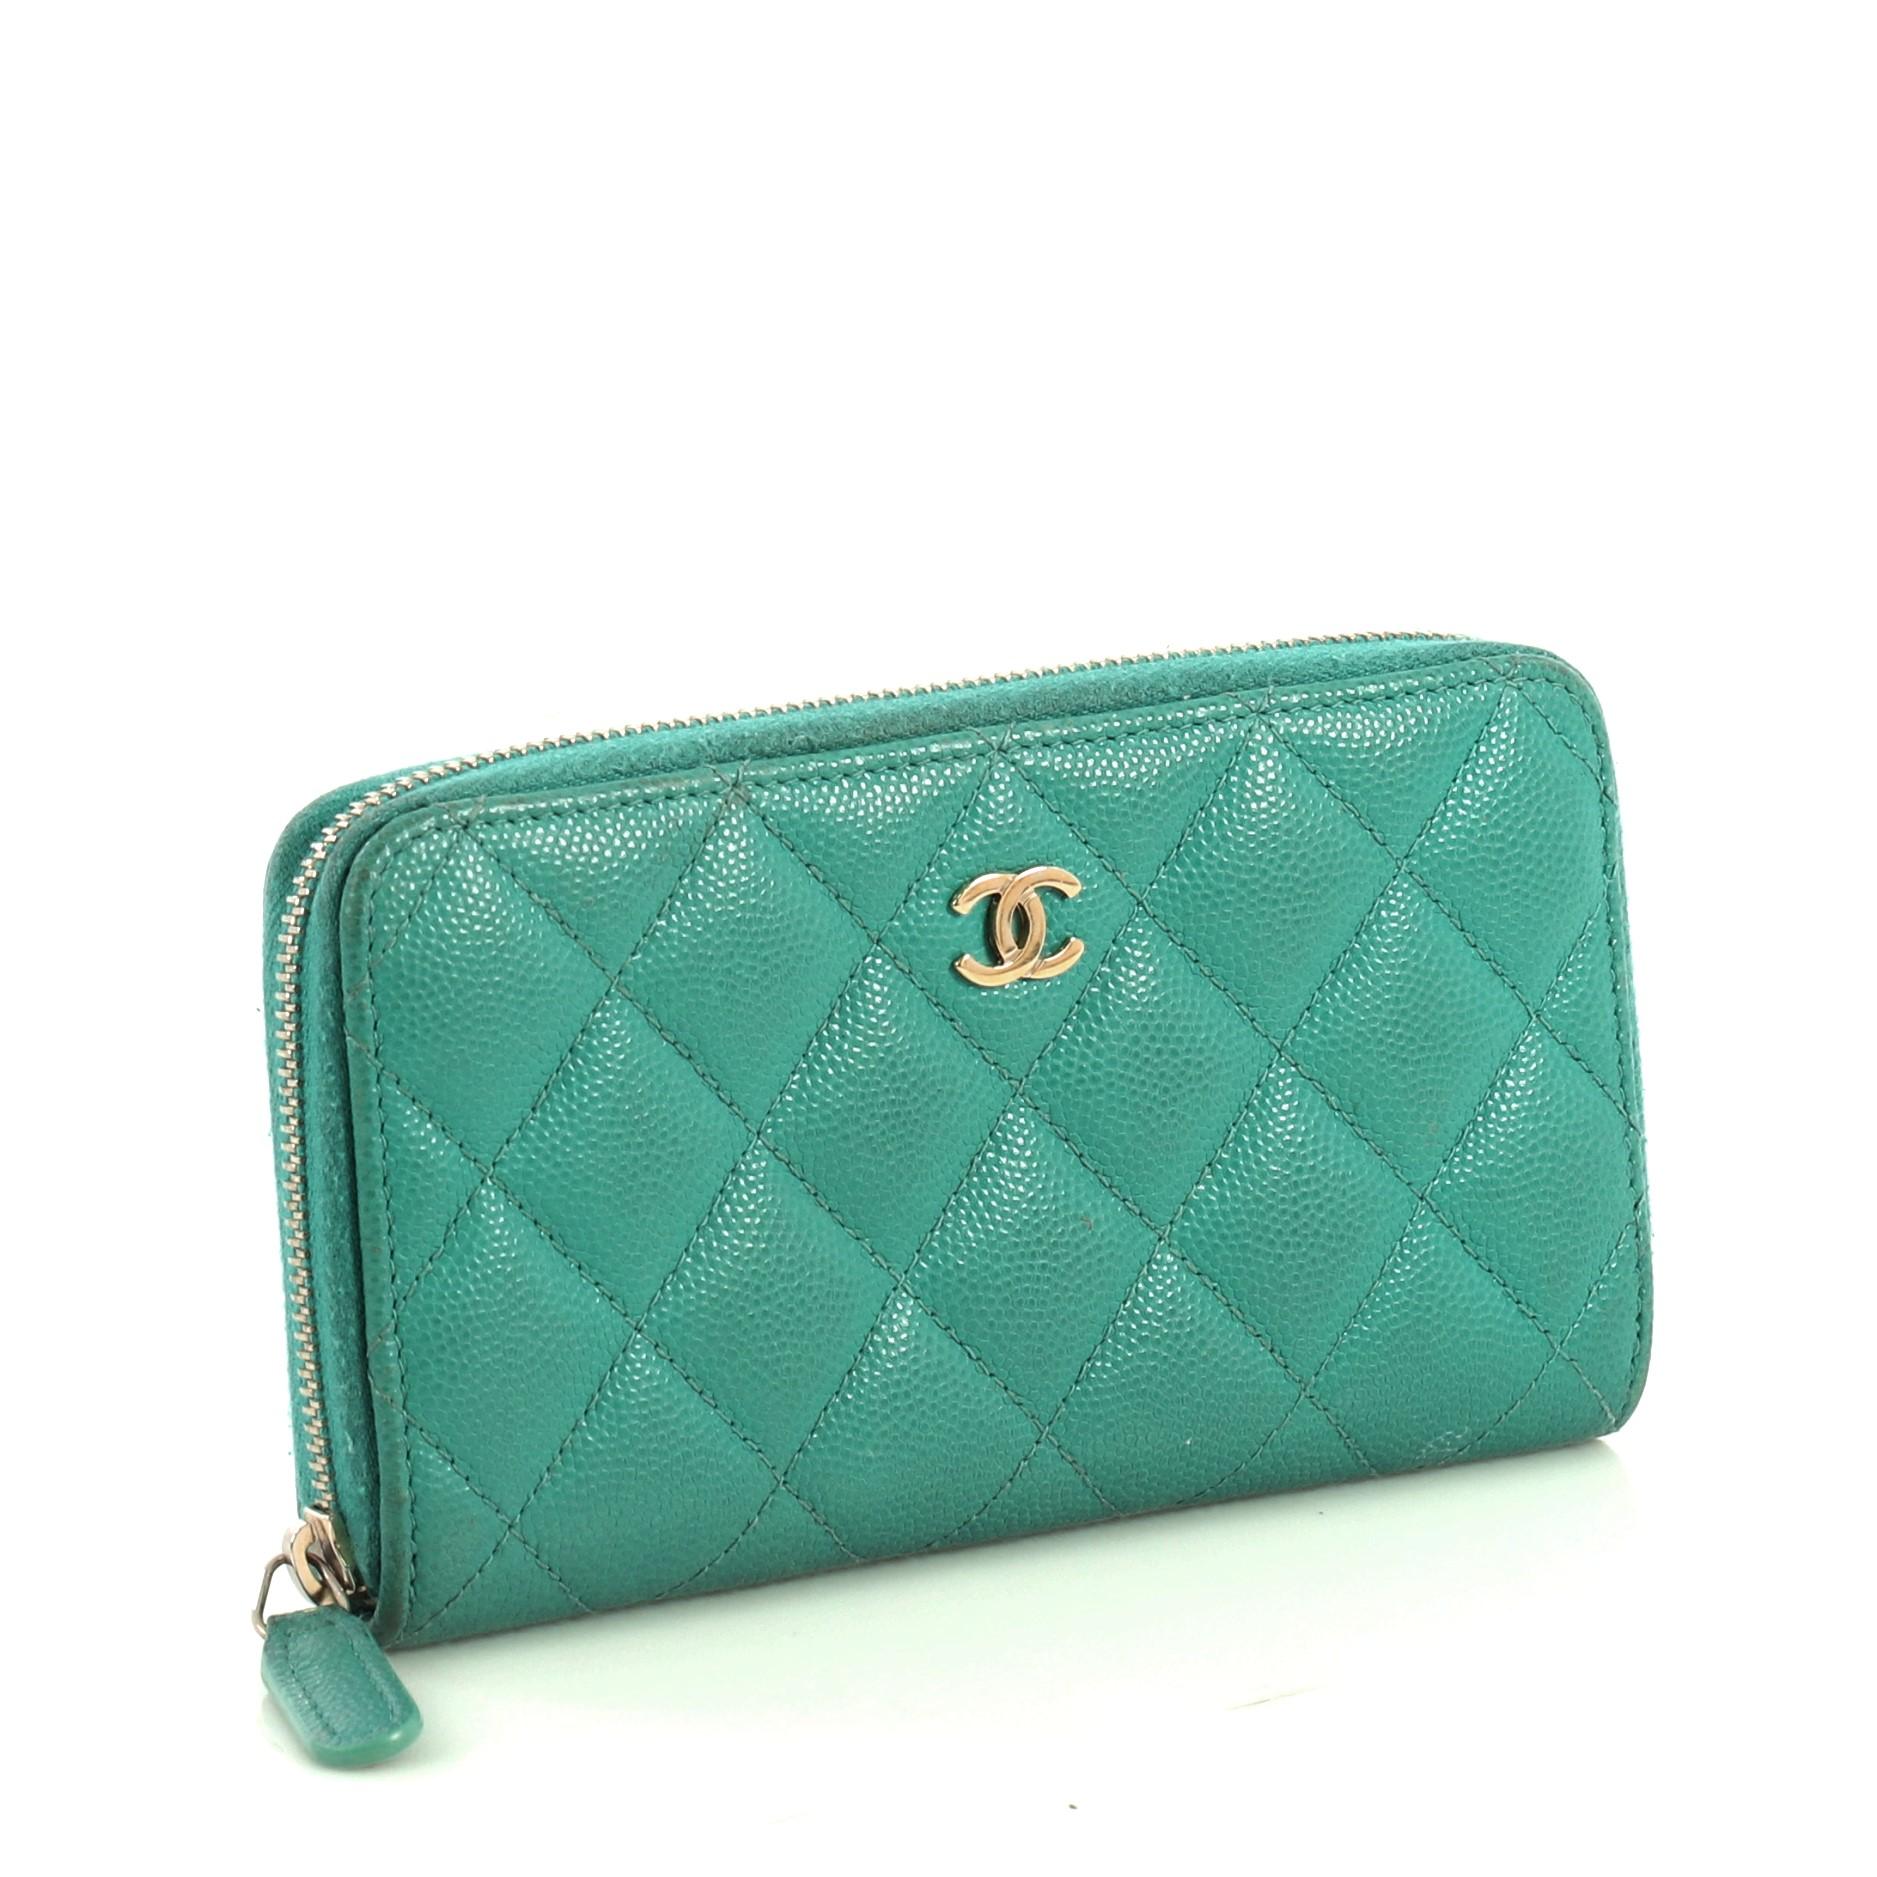 This Chanel Double Zip Around Wallet Quilted Caviar Small, crafted from green quilted caviar leather, features CC logo at the front and gold-tone hardware. Its zip closures open to a green leather interior with zip and slip pockets. Hologram sticker